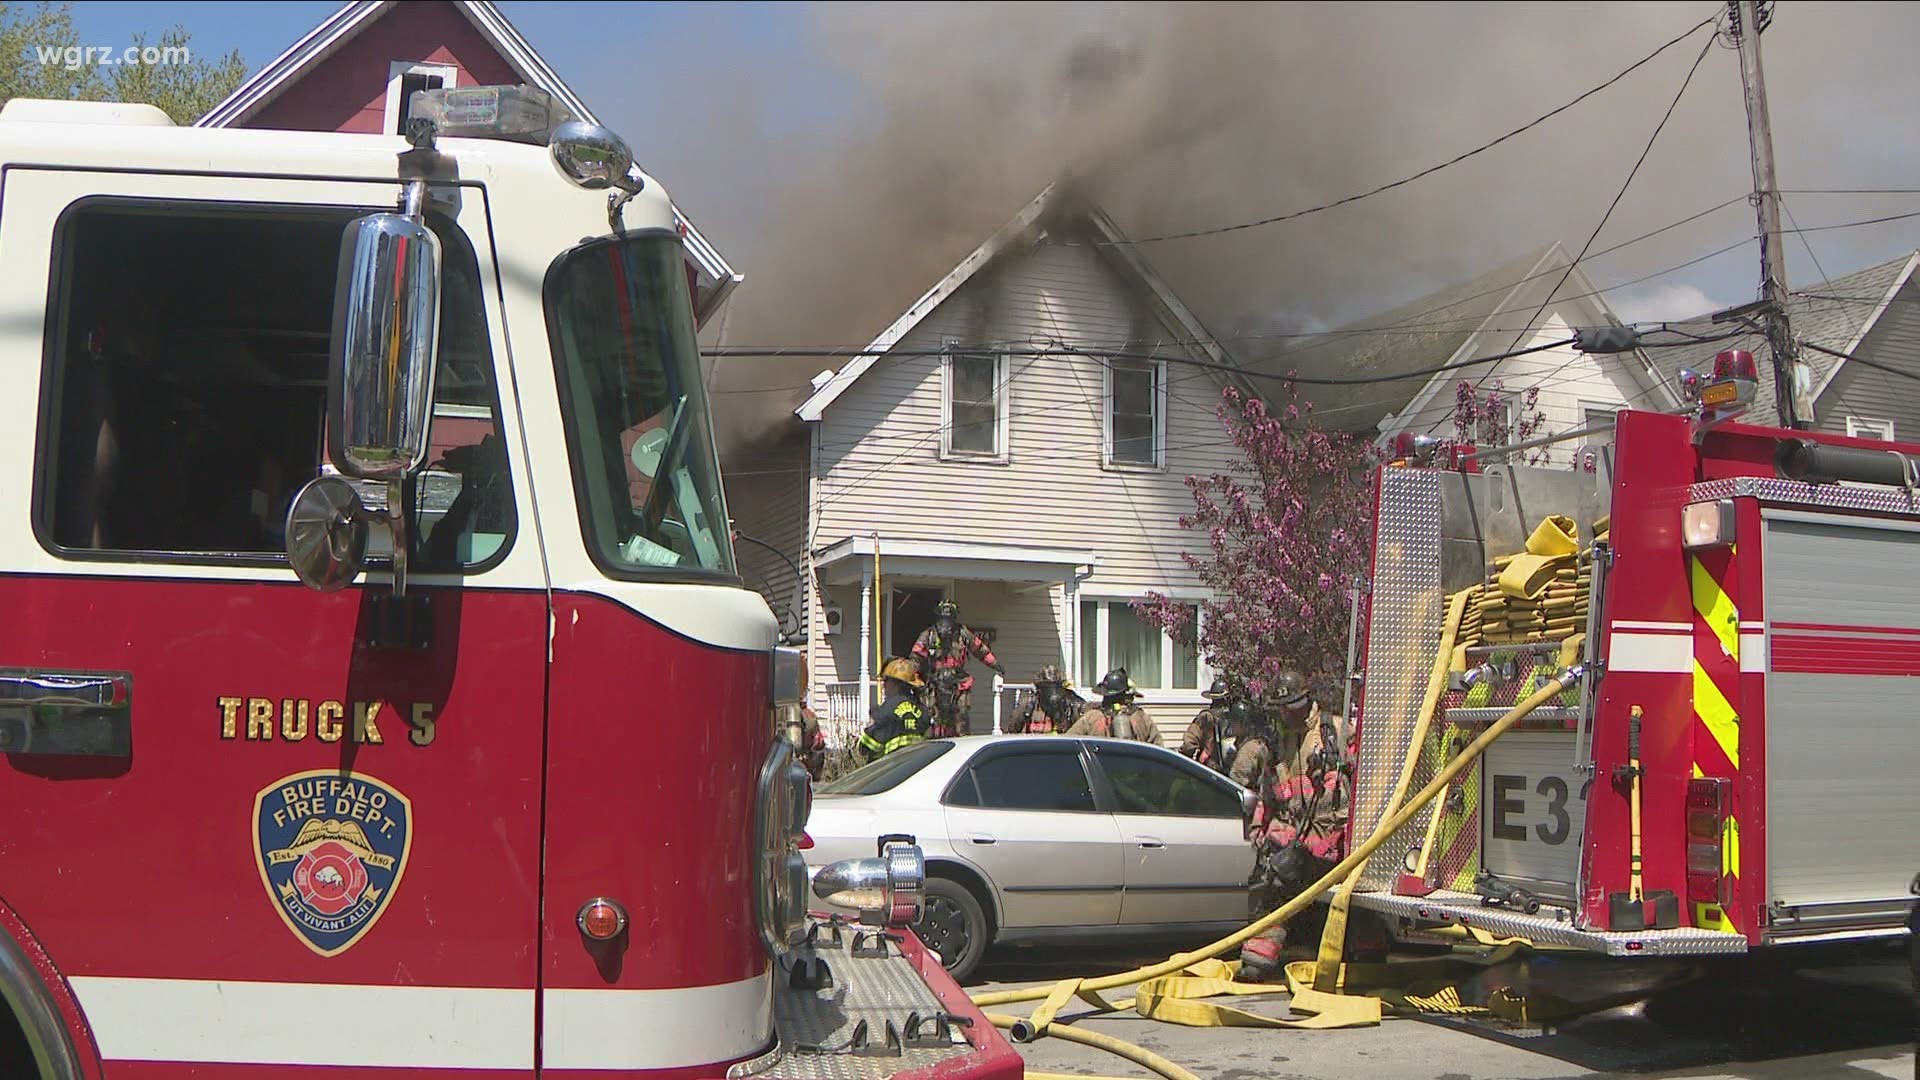 The Buffalo fire department says it happened around 2pm today. The fire even damaged a neighboring home.